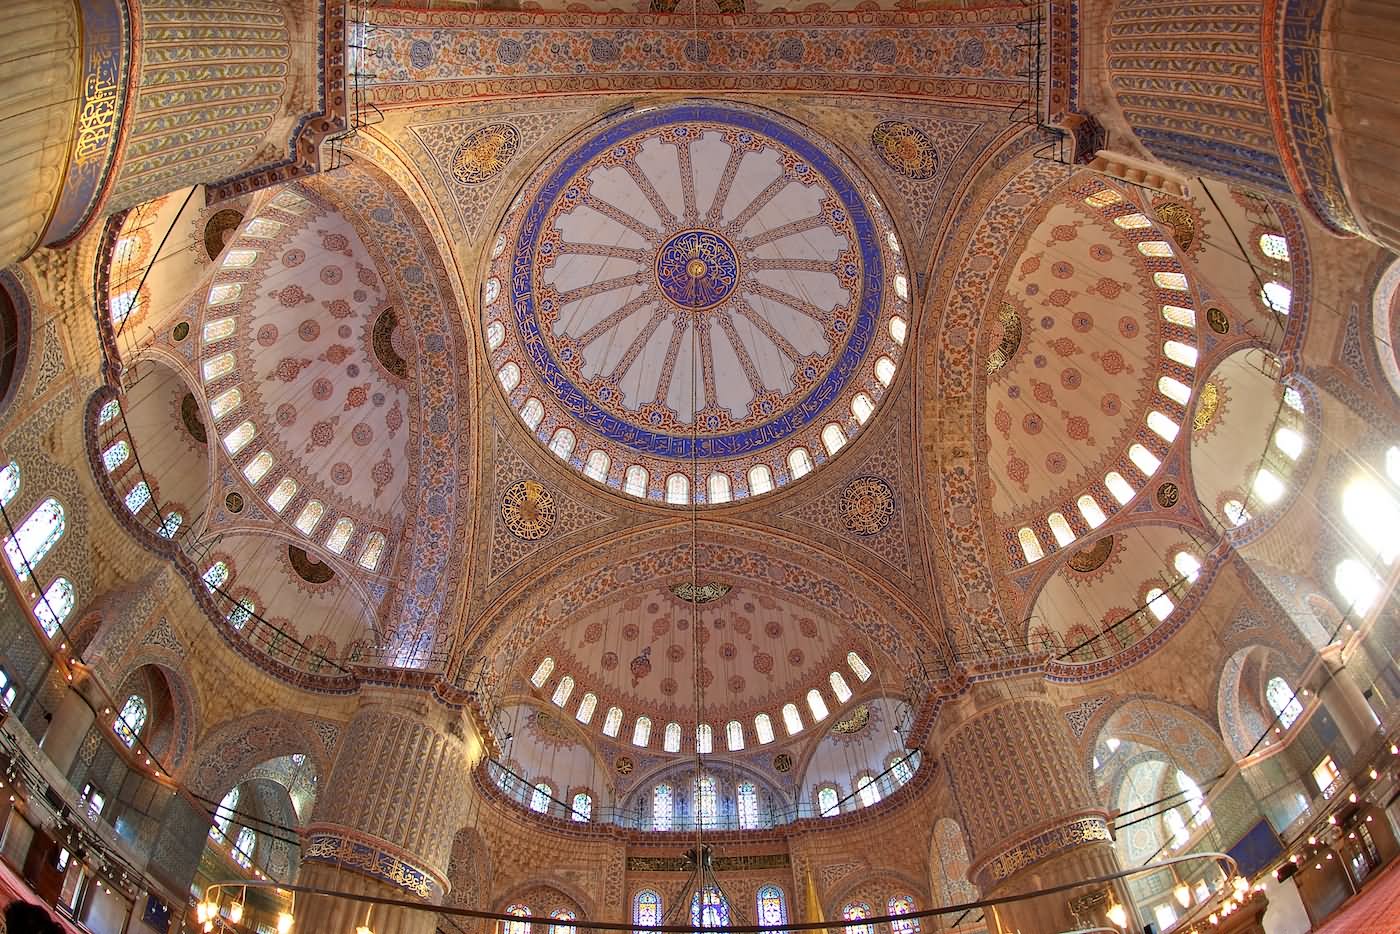 30 Most Incredible Interior View Images Of The Blue Mosque